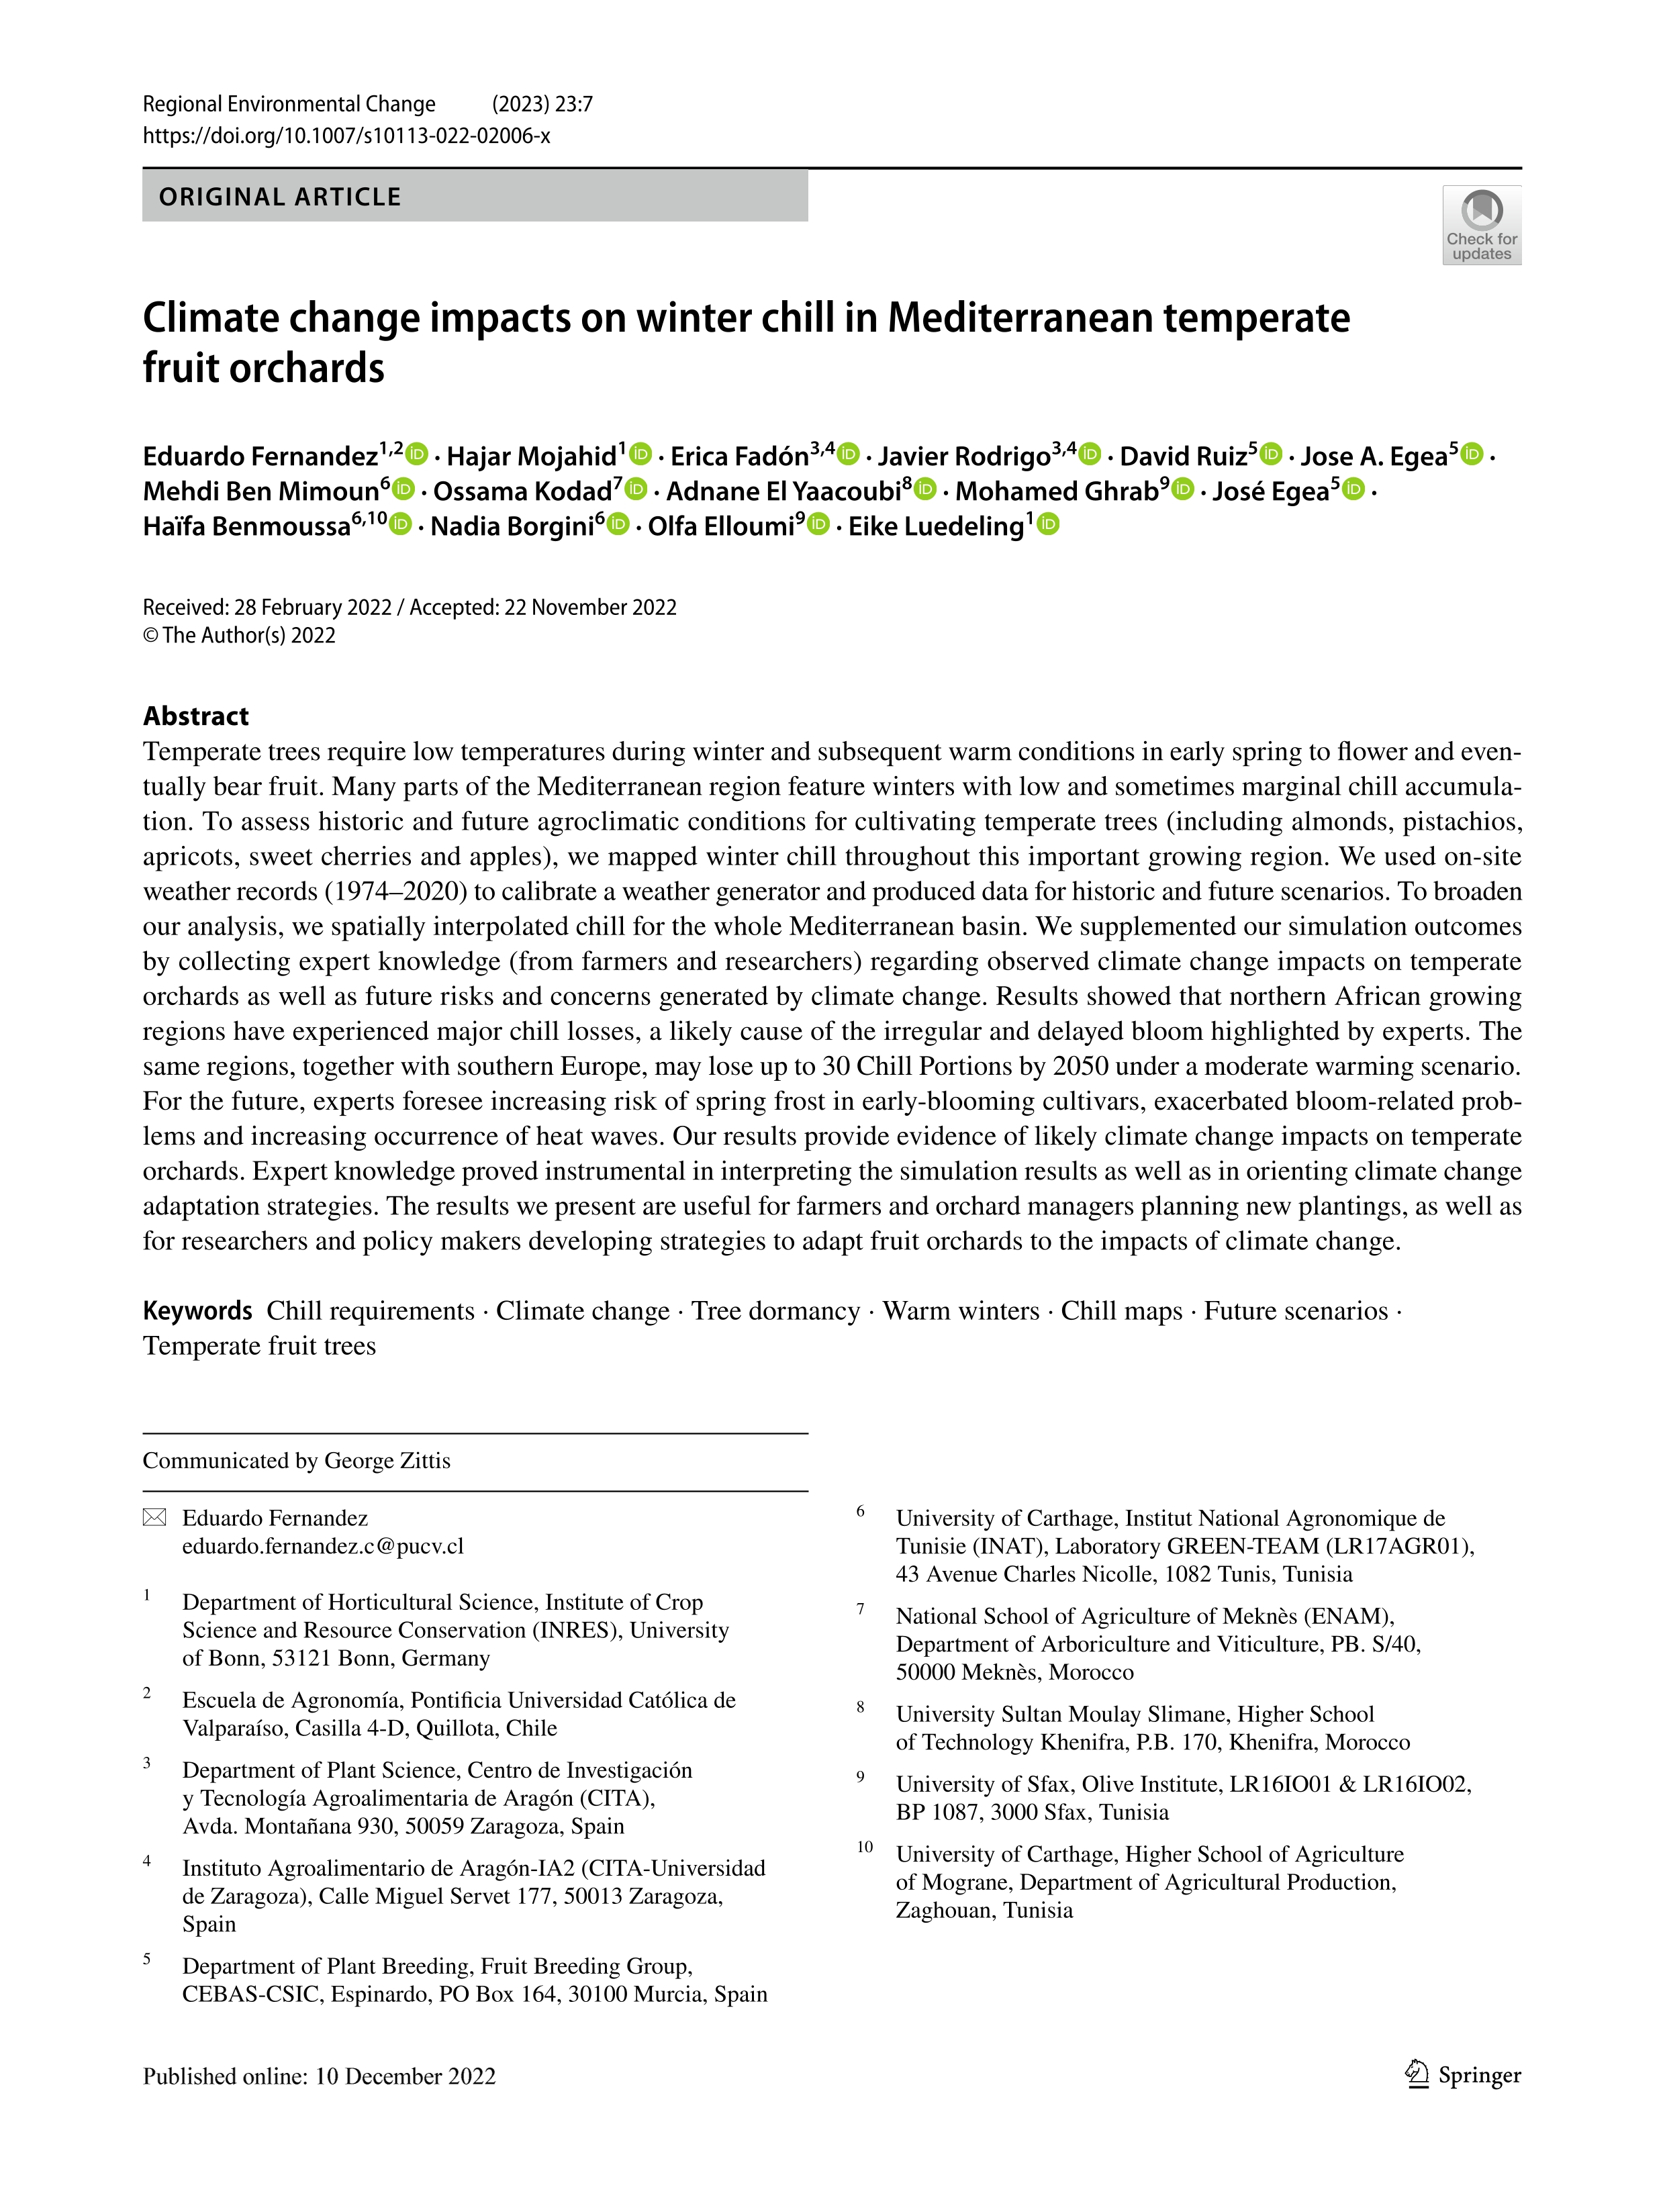 Climate change impacts on winter chill in Mediterranean temperate fruit orchards